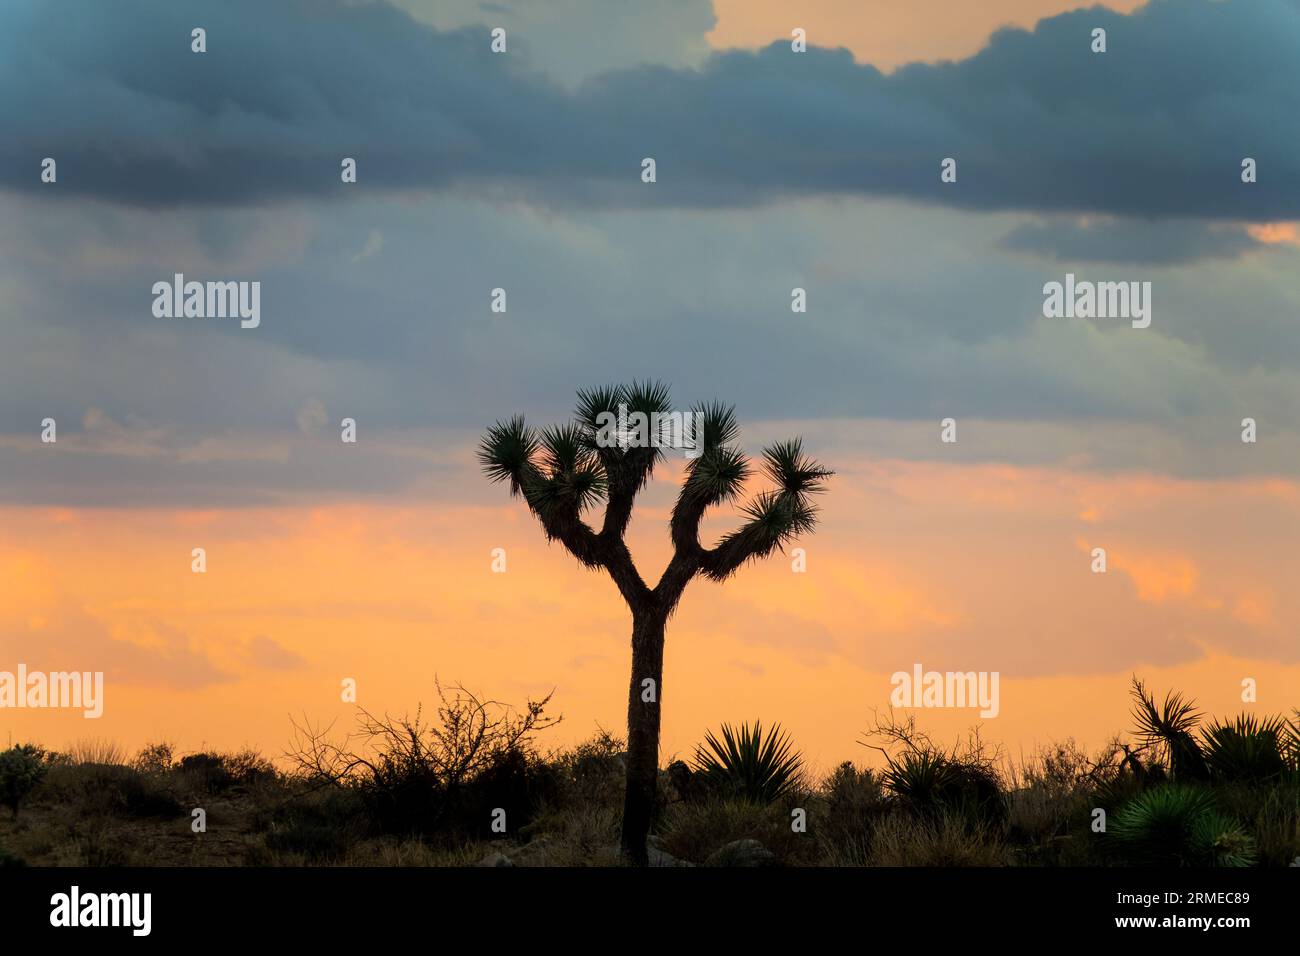 Silhouette of a Joshua tree at sunset in the Joshua Tree national park, California Stock Photo